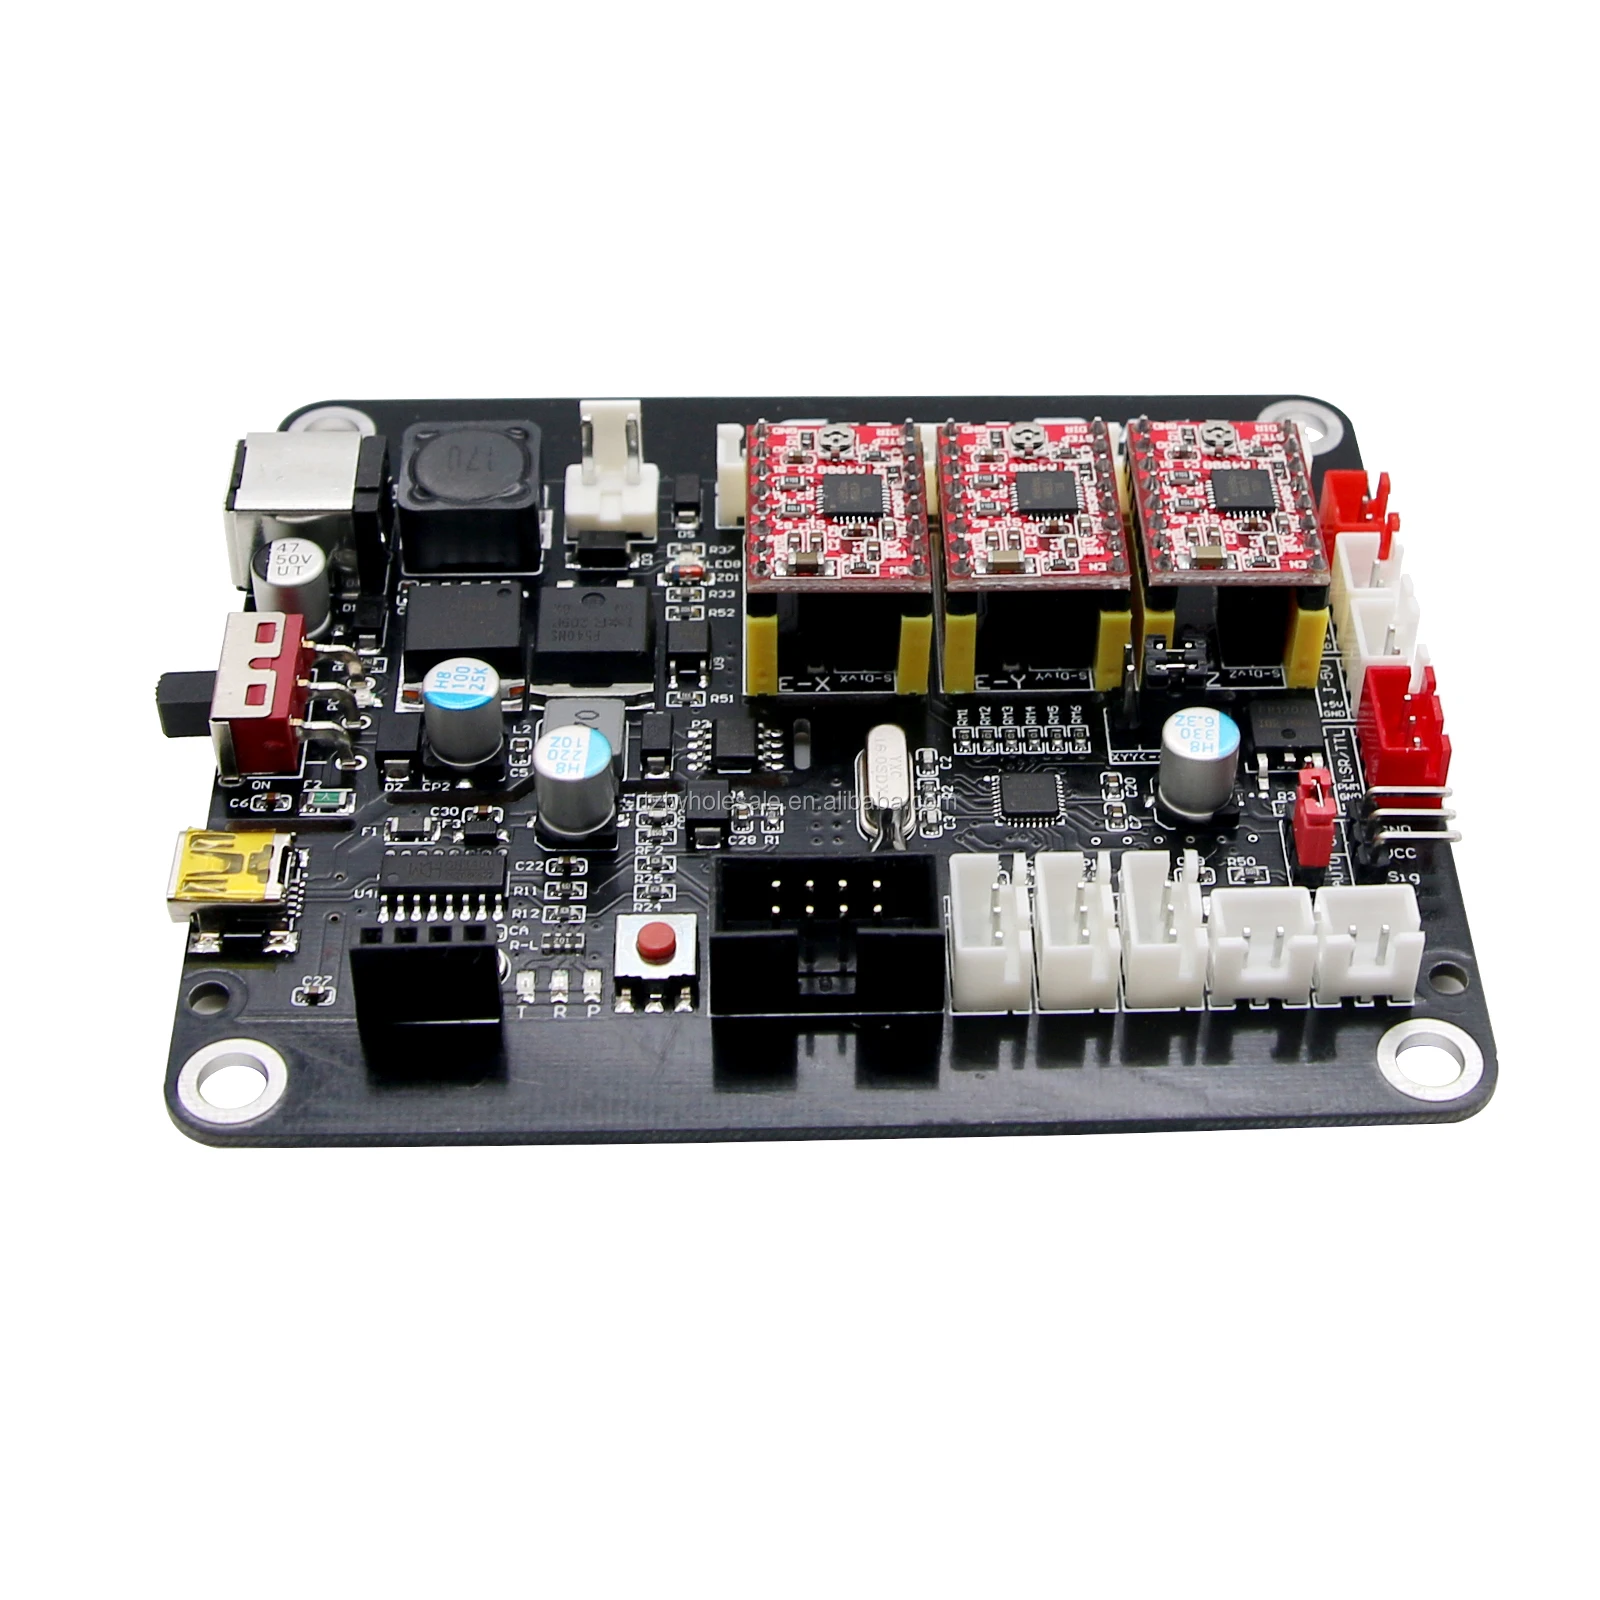 CNC 3 Axis Control Board Version 4.0 GRBL Support 2P/3P Laser PWM TTL Engraving 